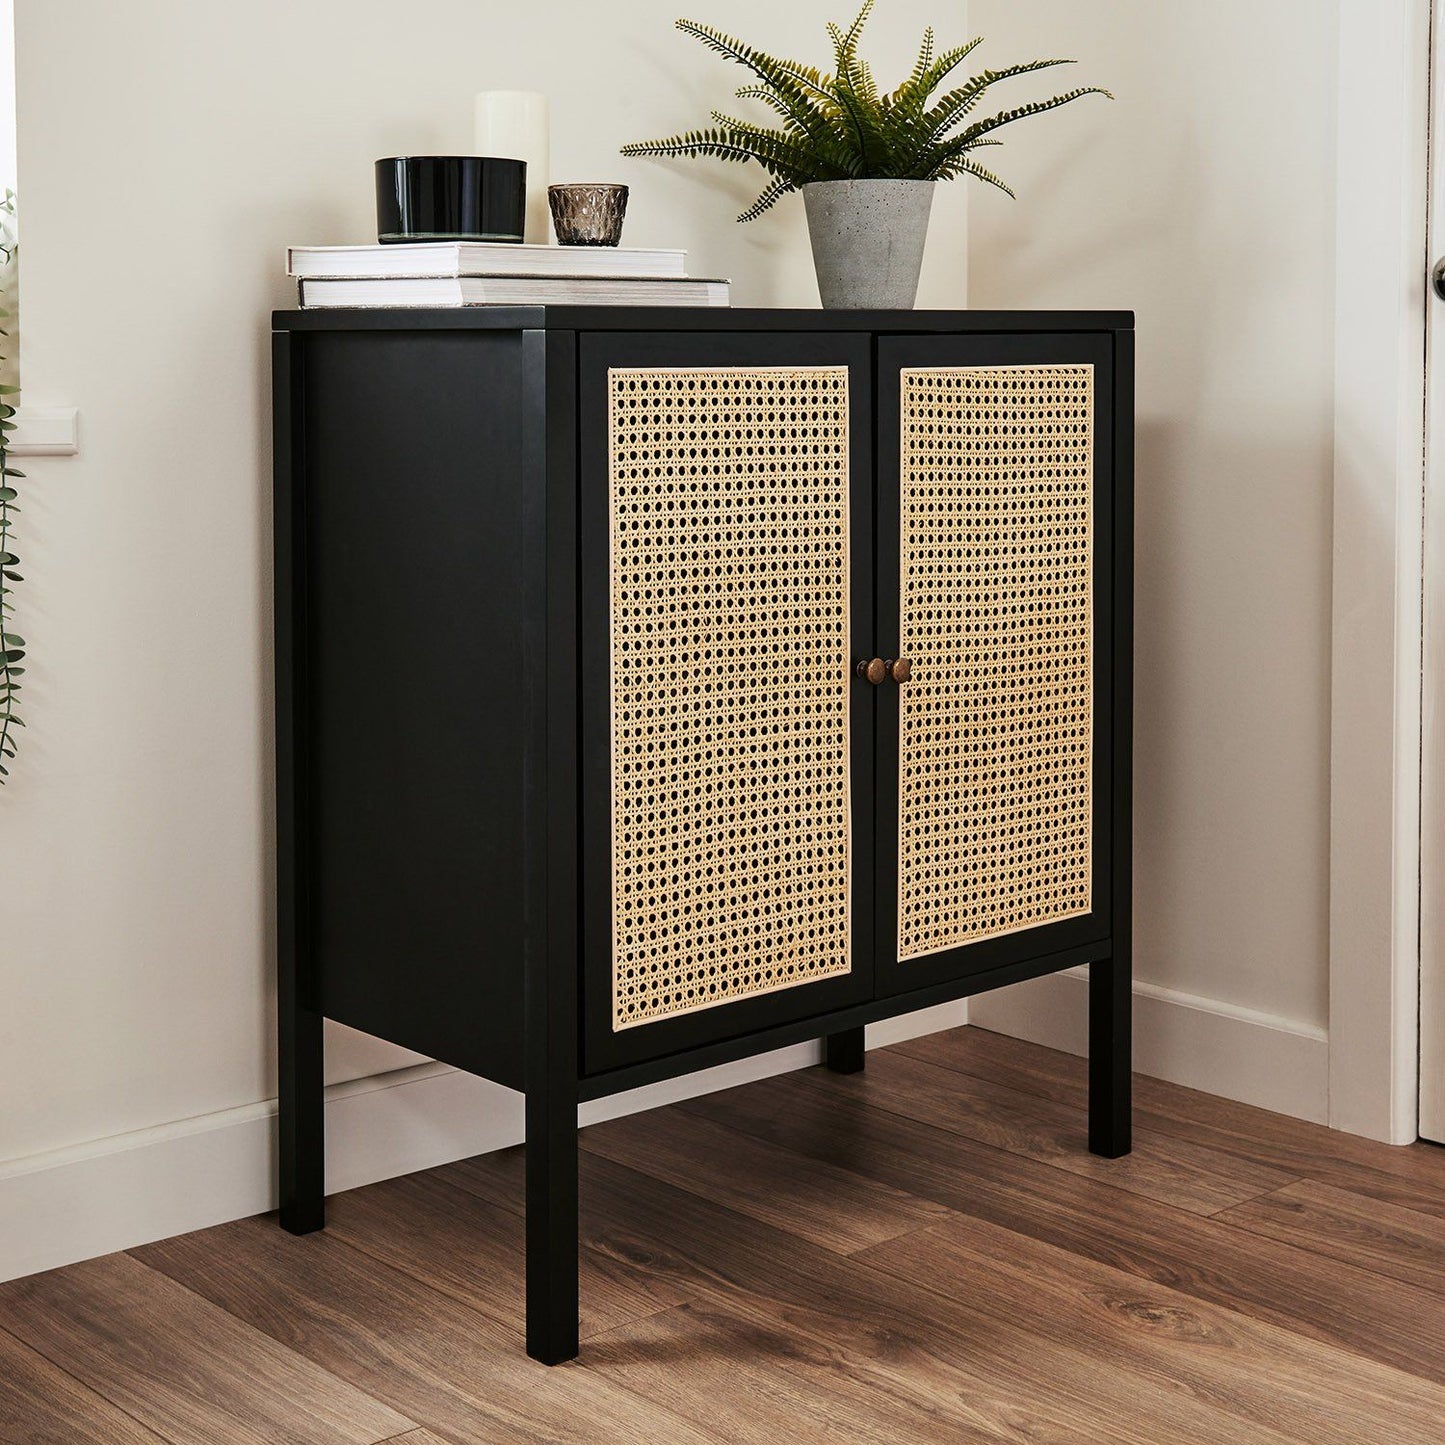 Charlie small sideboard - cane front - black